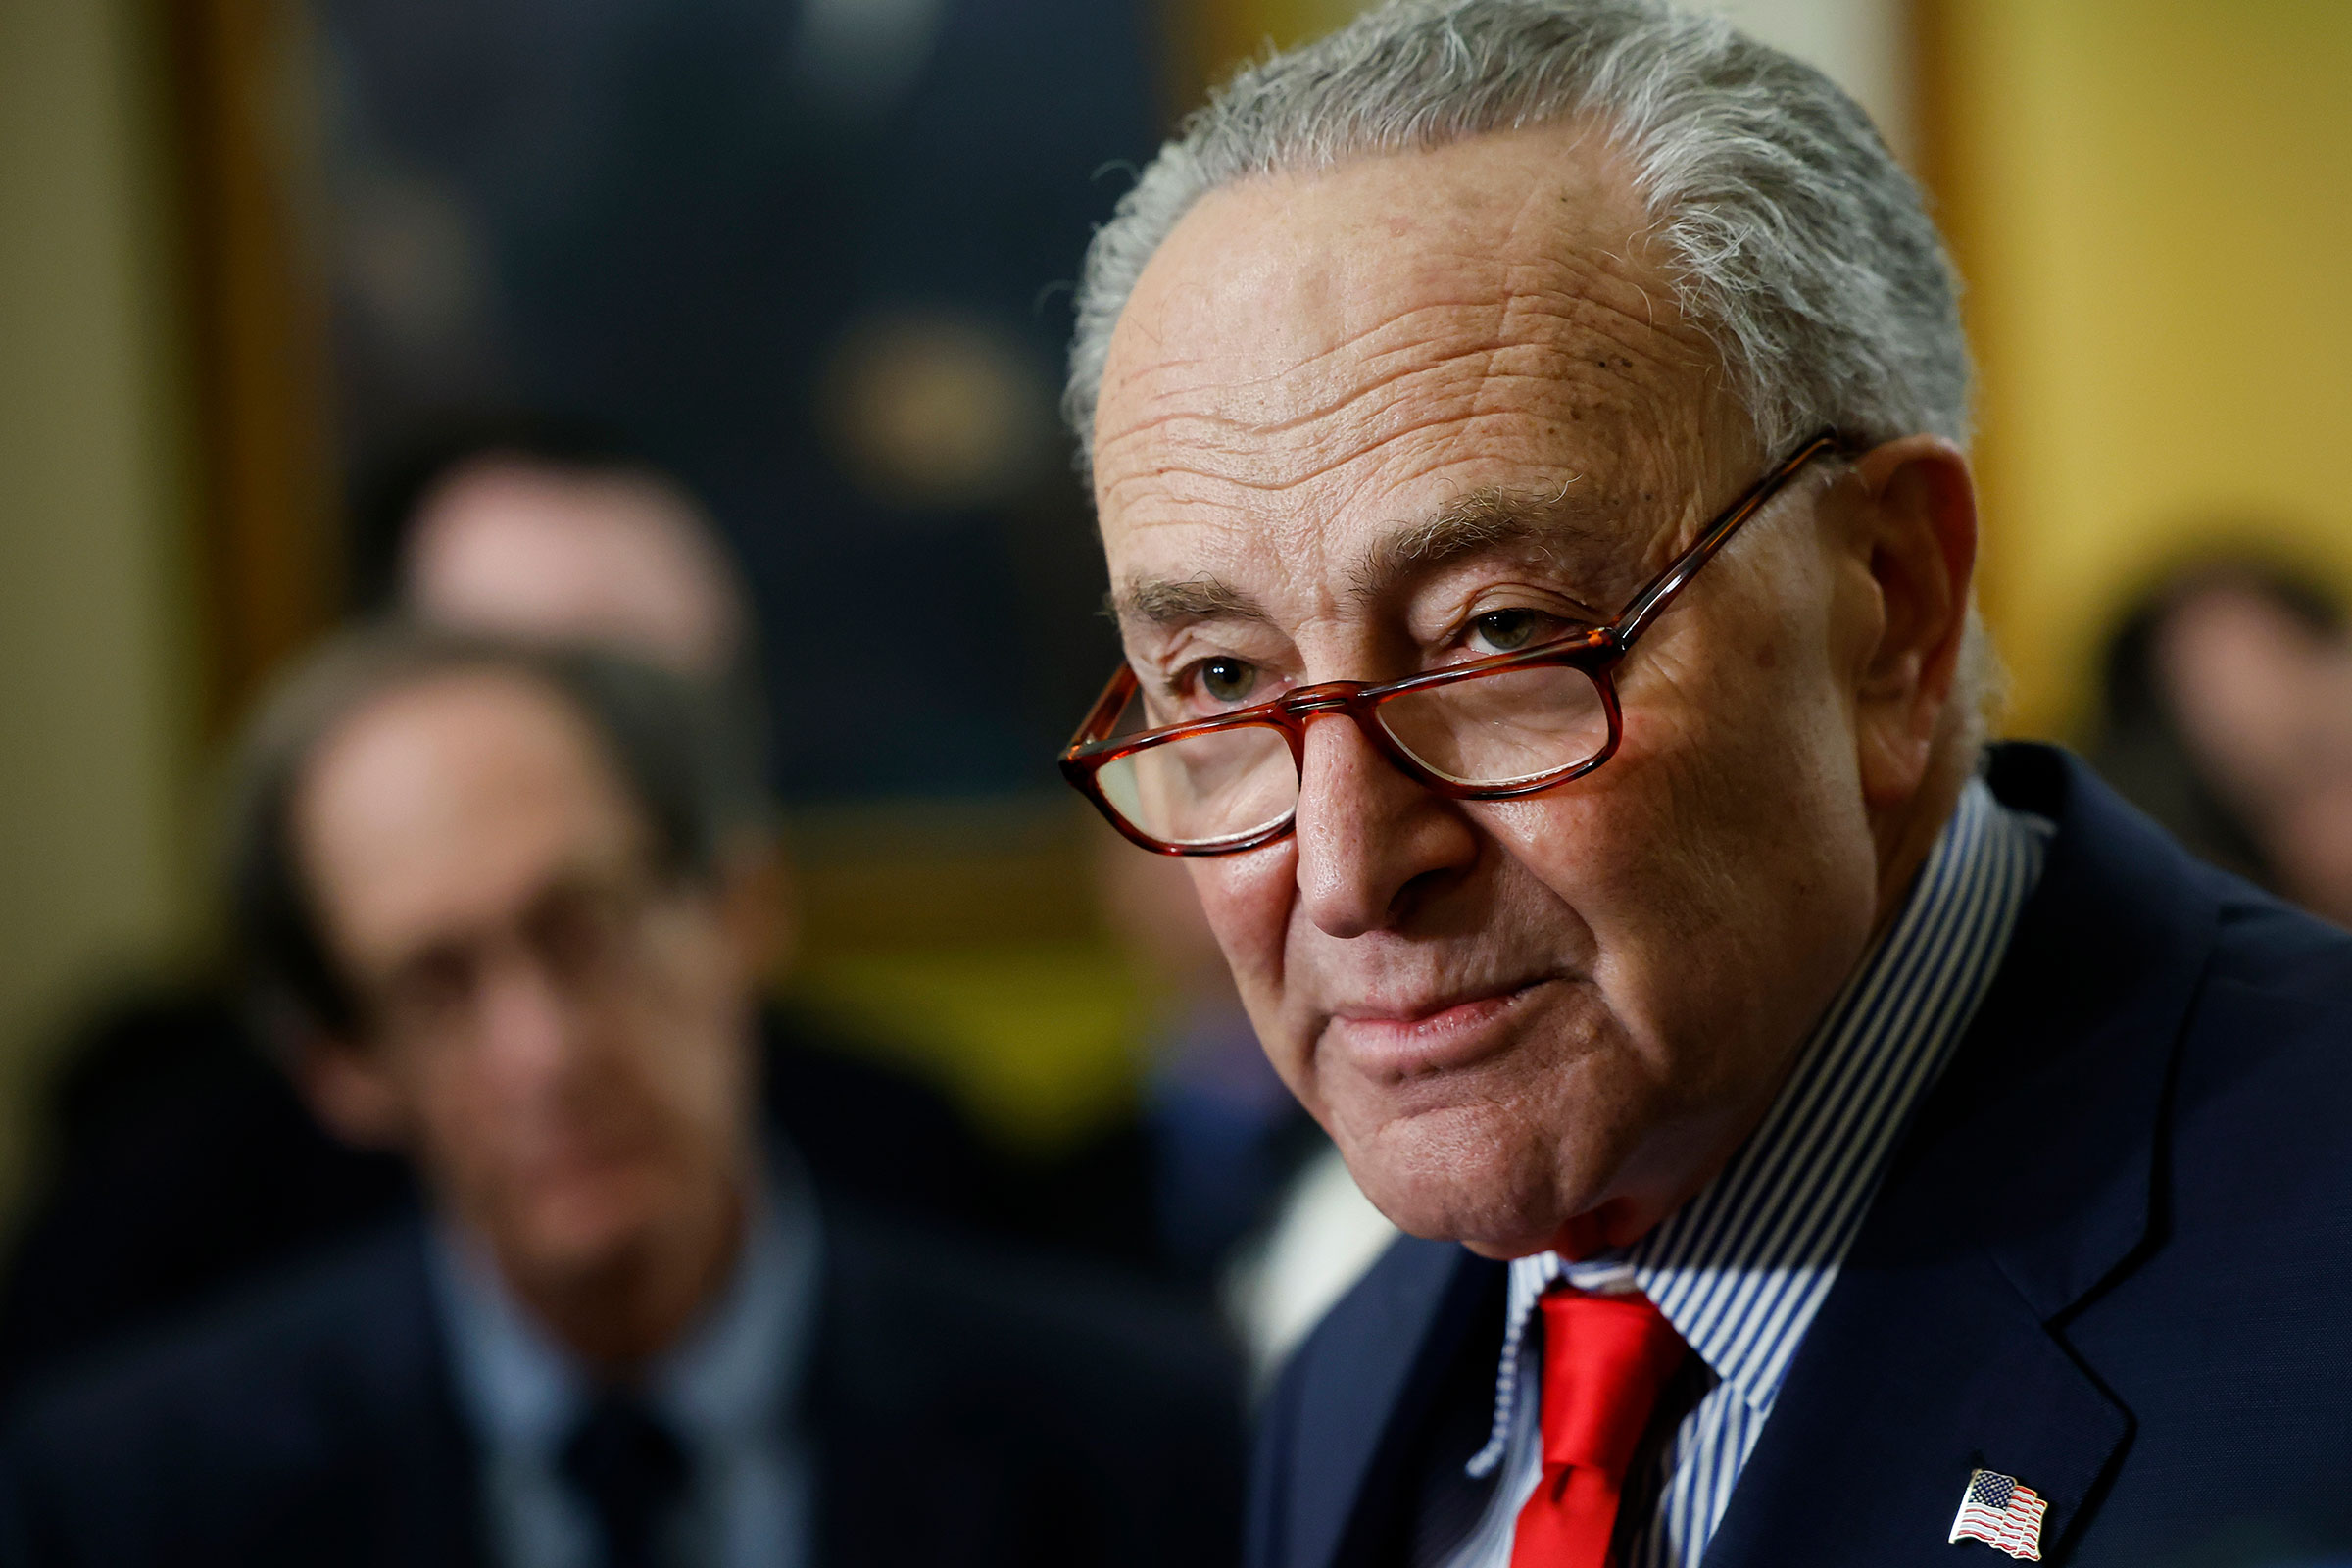 Senate Majority Leader Chuck Schumer speaks to reporters after the weekly Senate Democrats caucus policy luncheon at the US Capitol on March 12 in Washington, DC. 